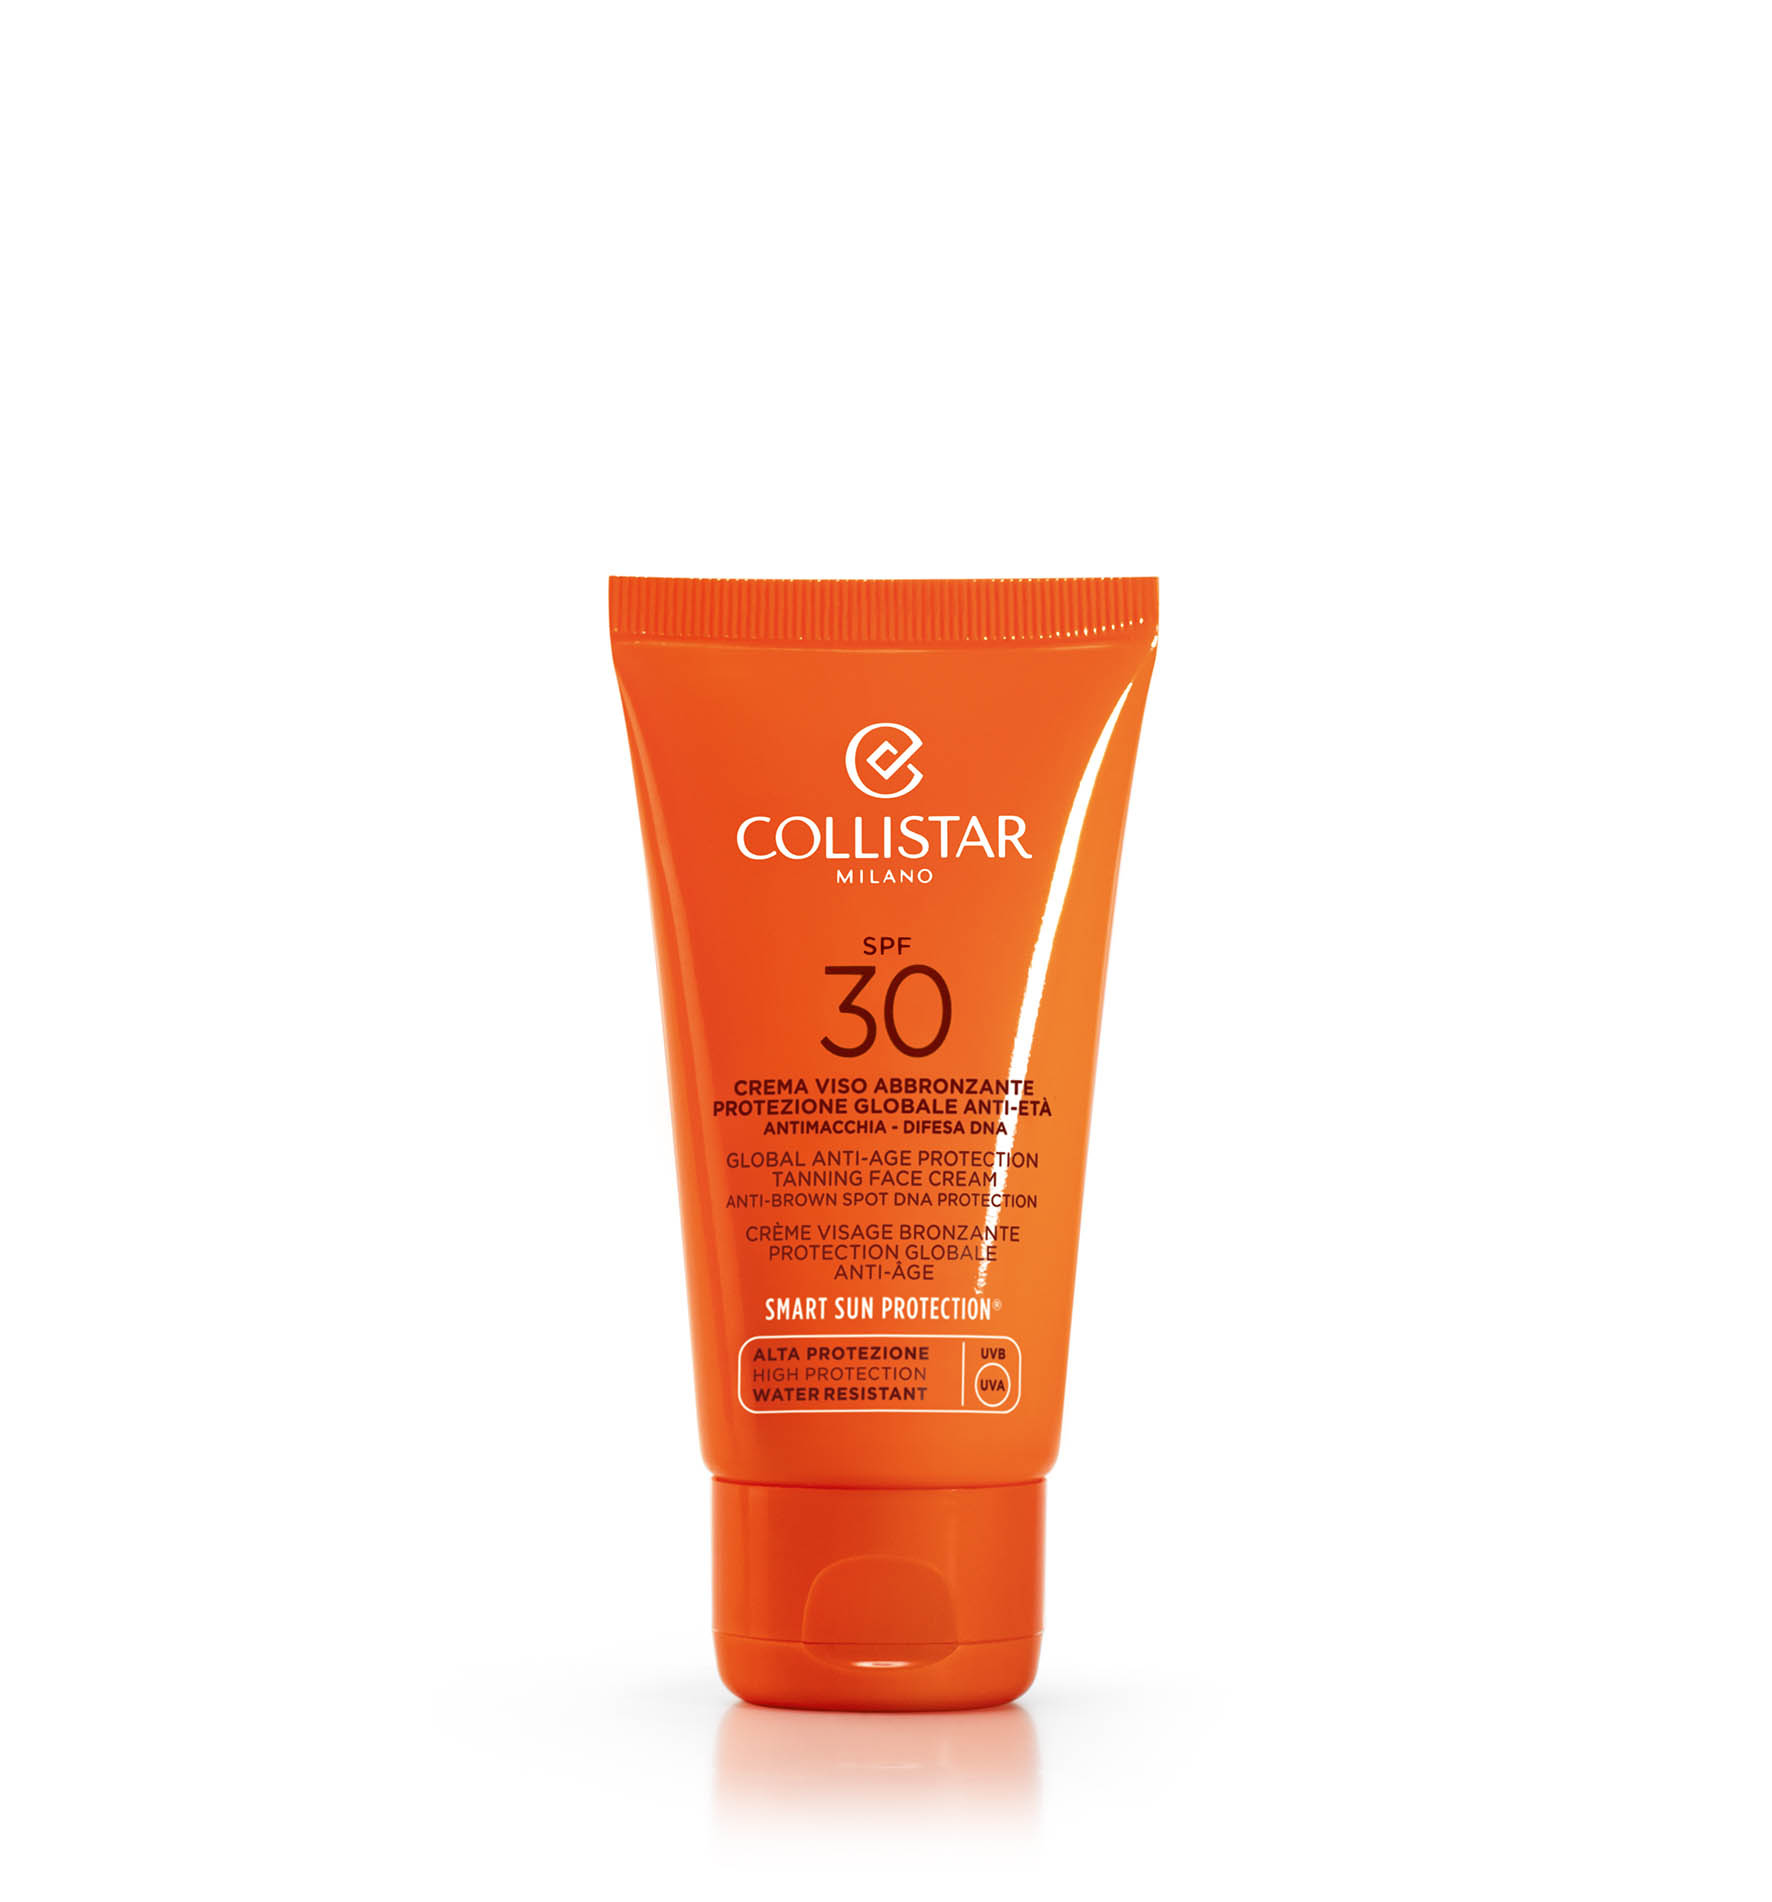 GLOBAL ANTI-AGE PROTECTION TANNING FACE CREAM SPF 30 - PROTECTION | Collistar - Shop Online Ufficiale